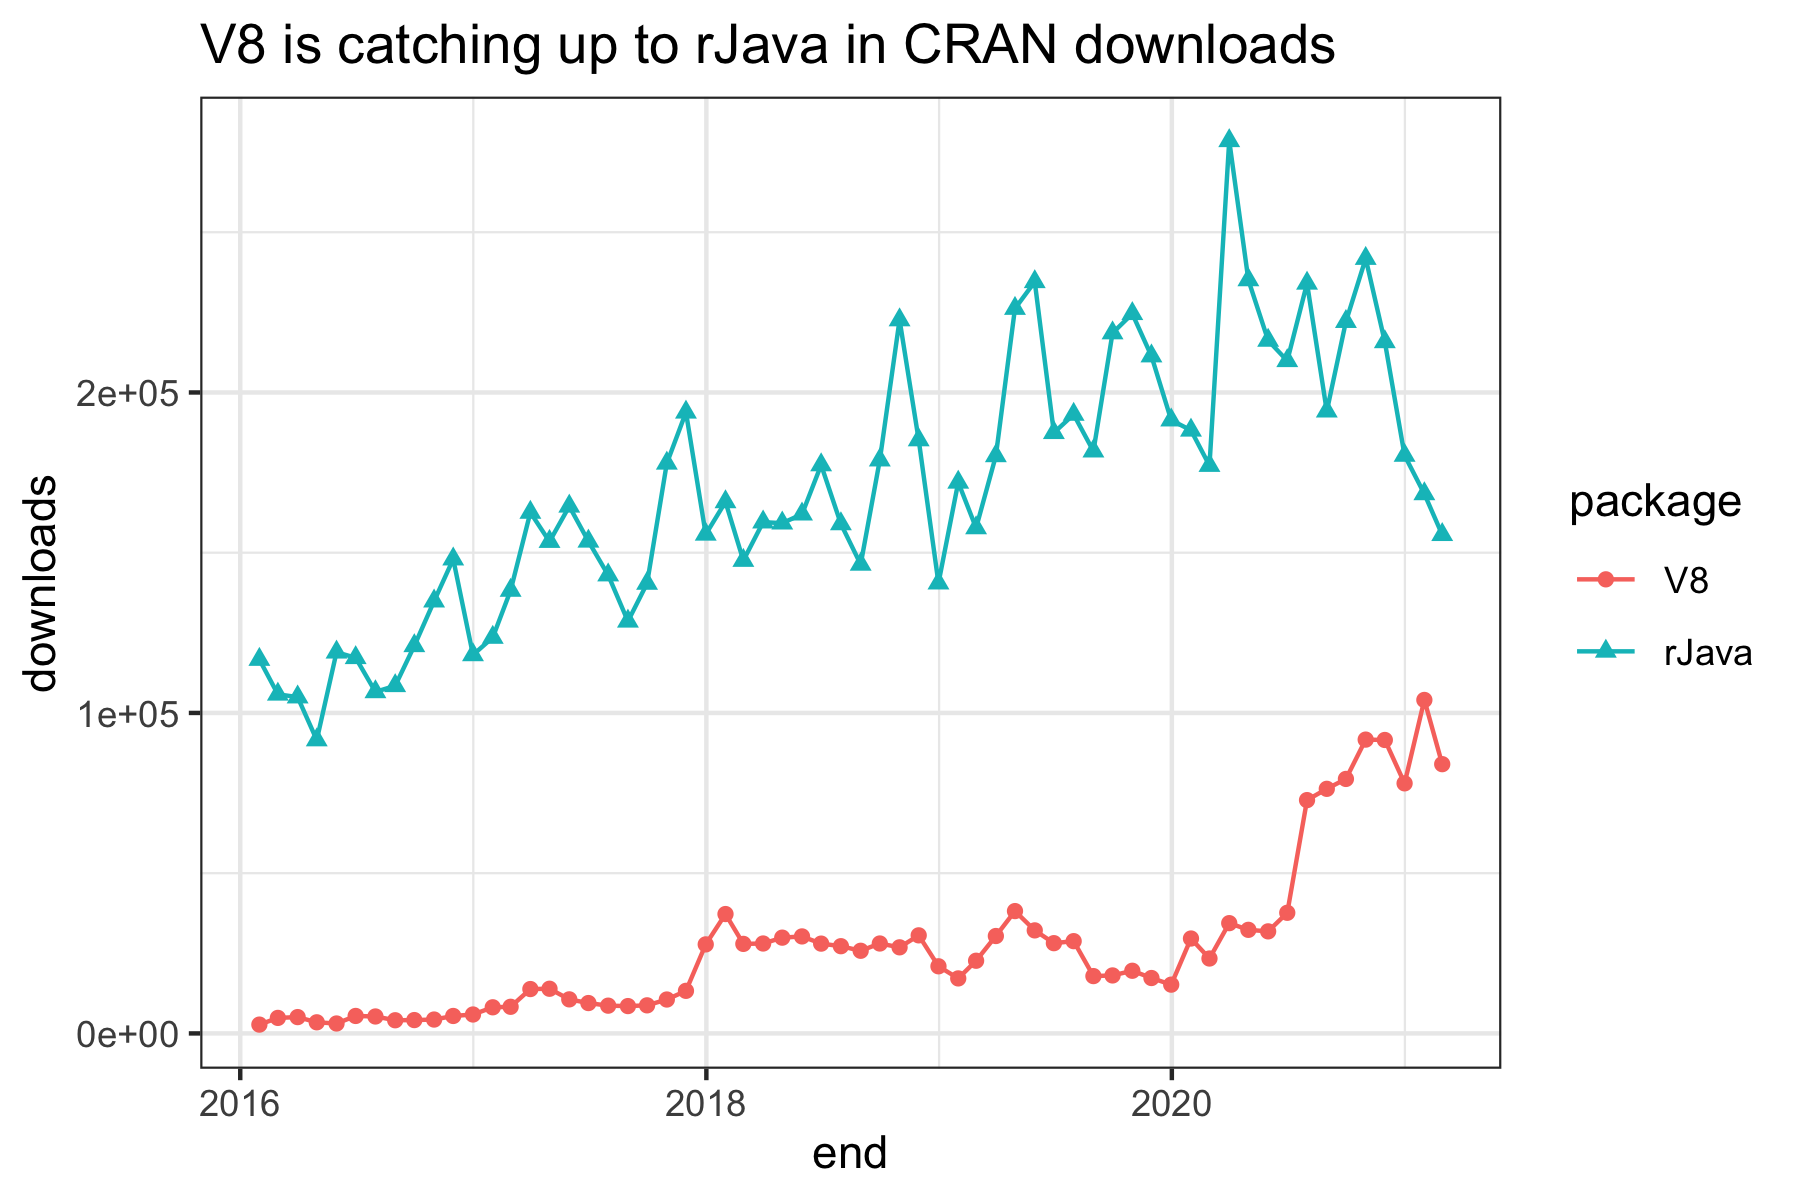 Chart showing V8 vs RJava downloads from CRAN since 2016; by mid-2020, V8 had more
than half the downloads of rJava with periodic steps up.